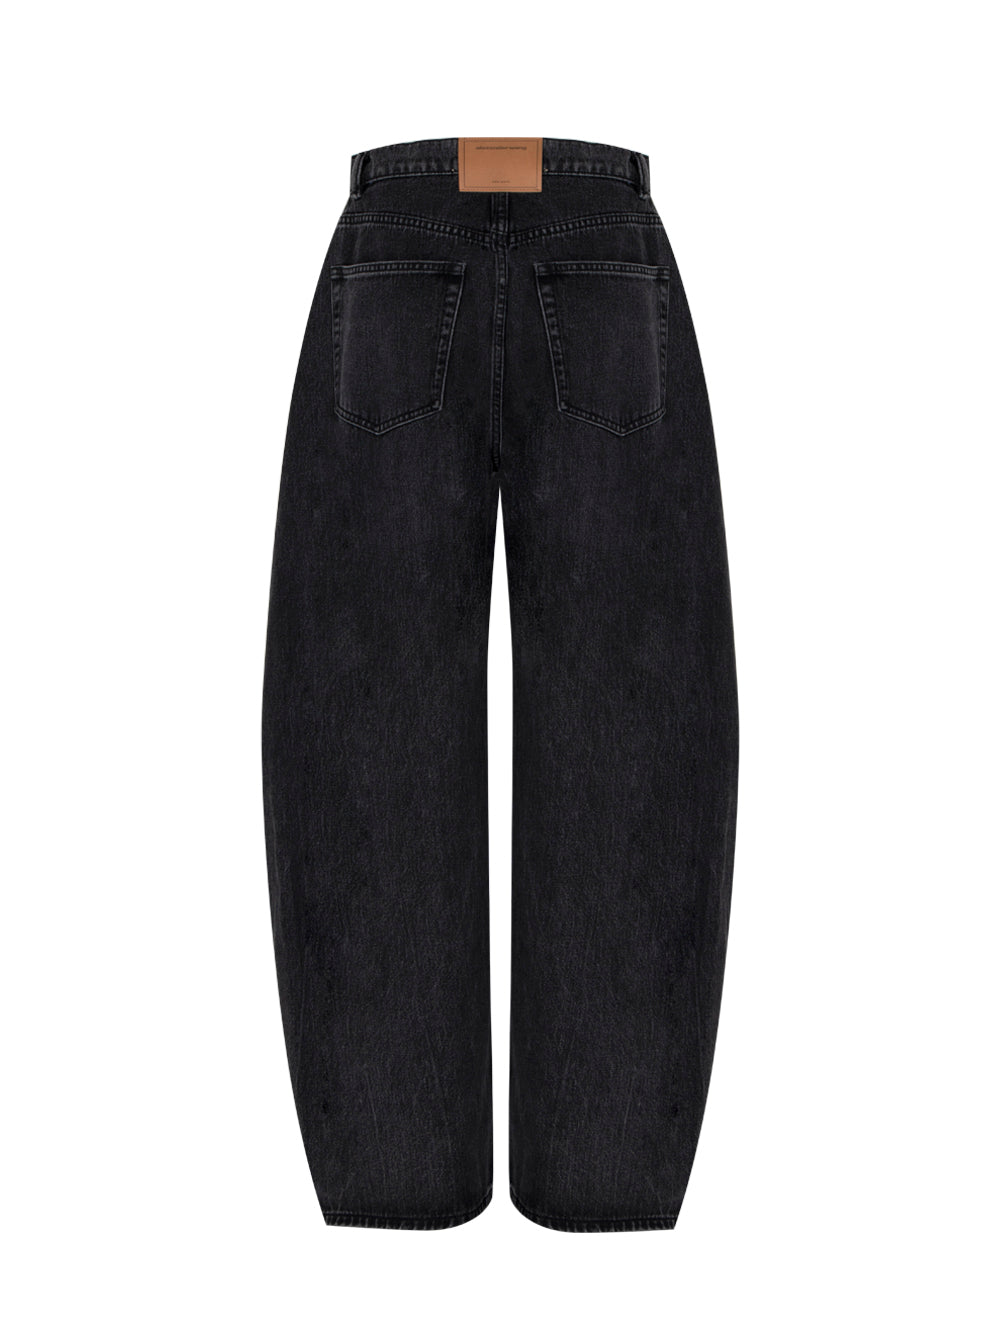 Oversized Rounded Low Rise Jeans (Grey Aged)